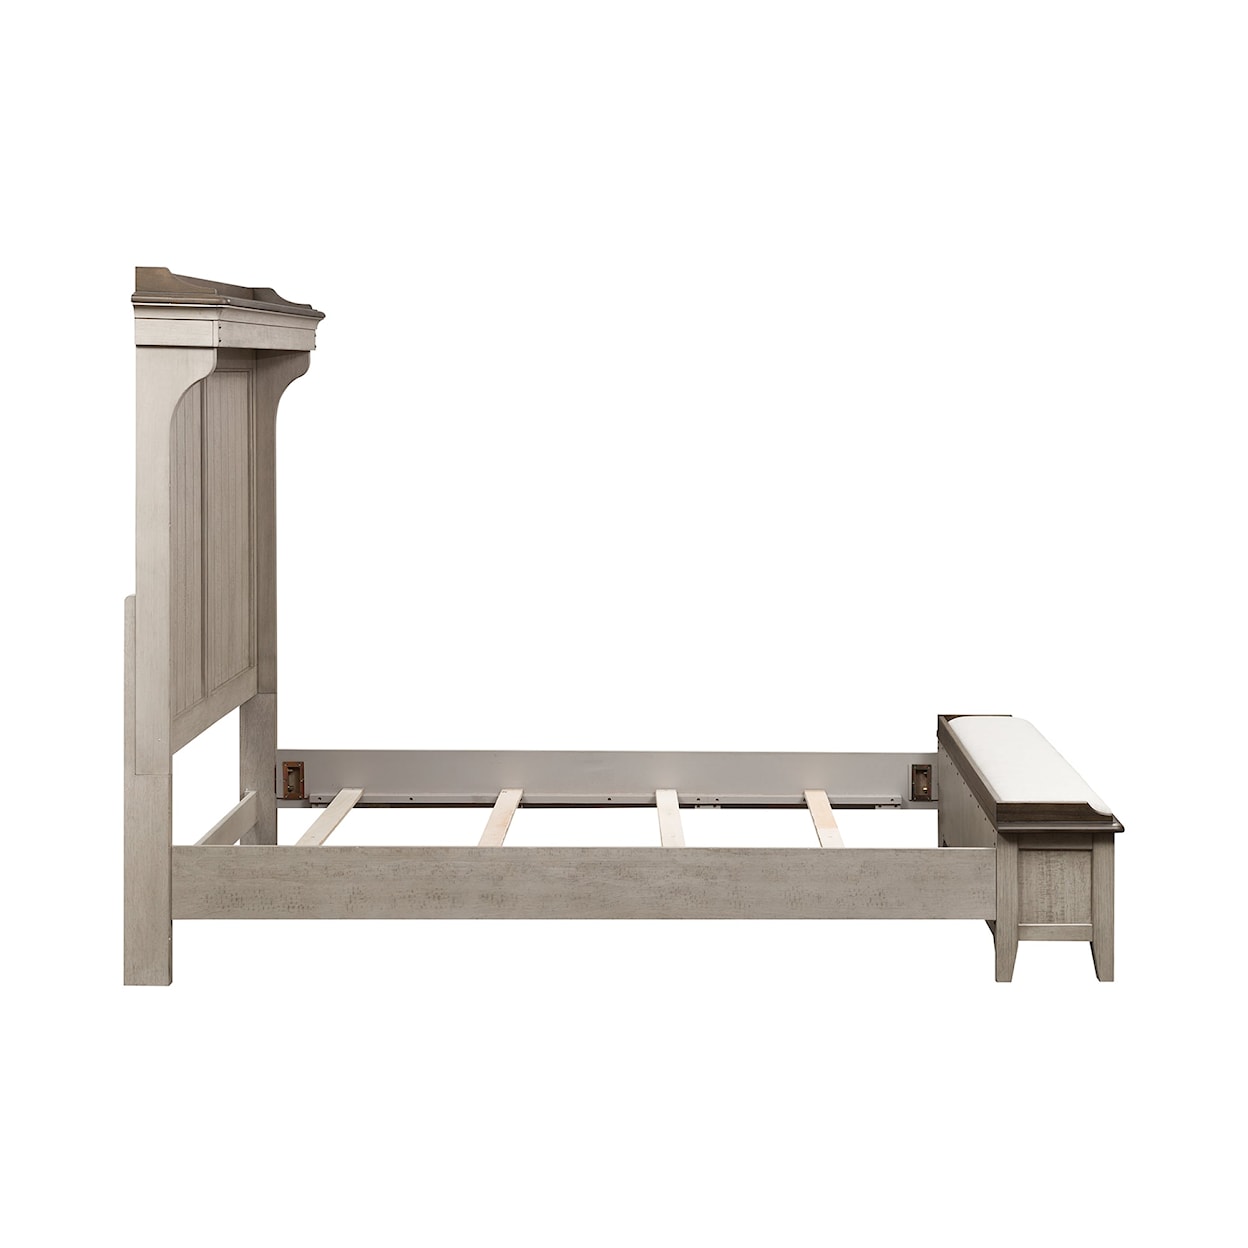 Liberty Furniture Ivy Hollow Queen Mantle Storage Bed